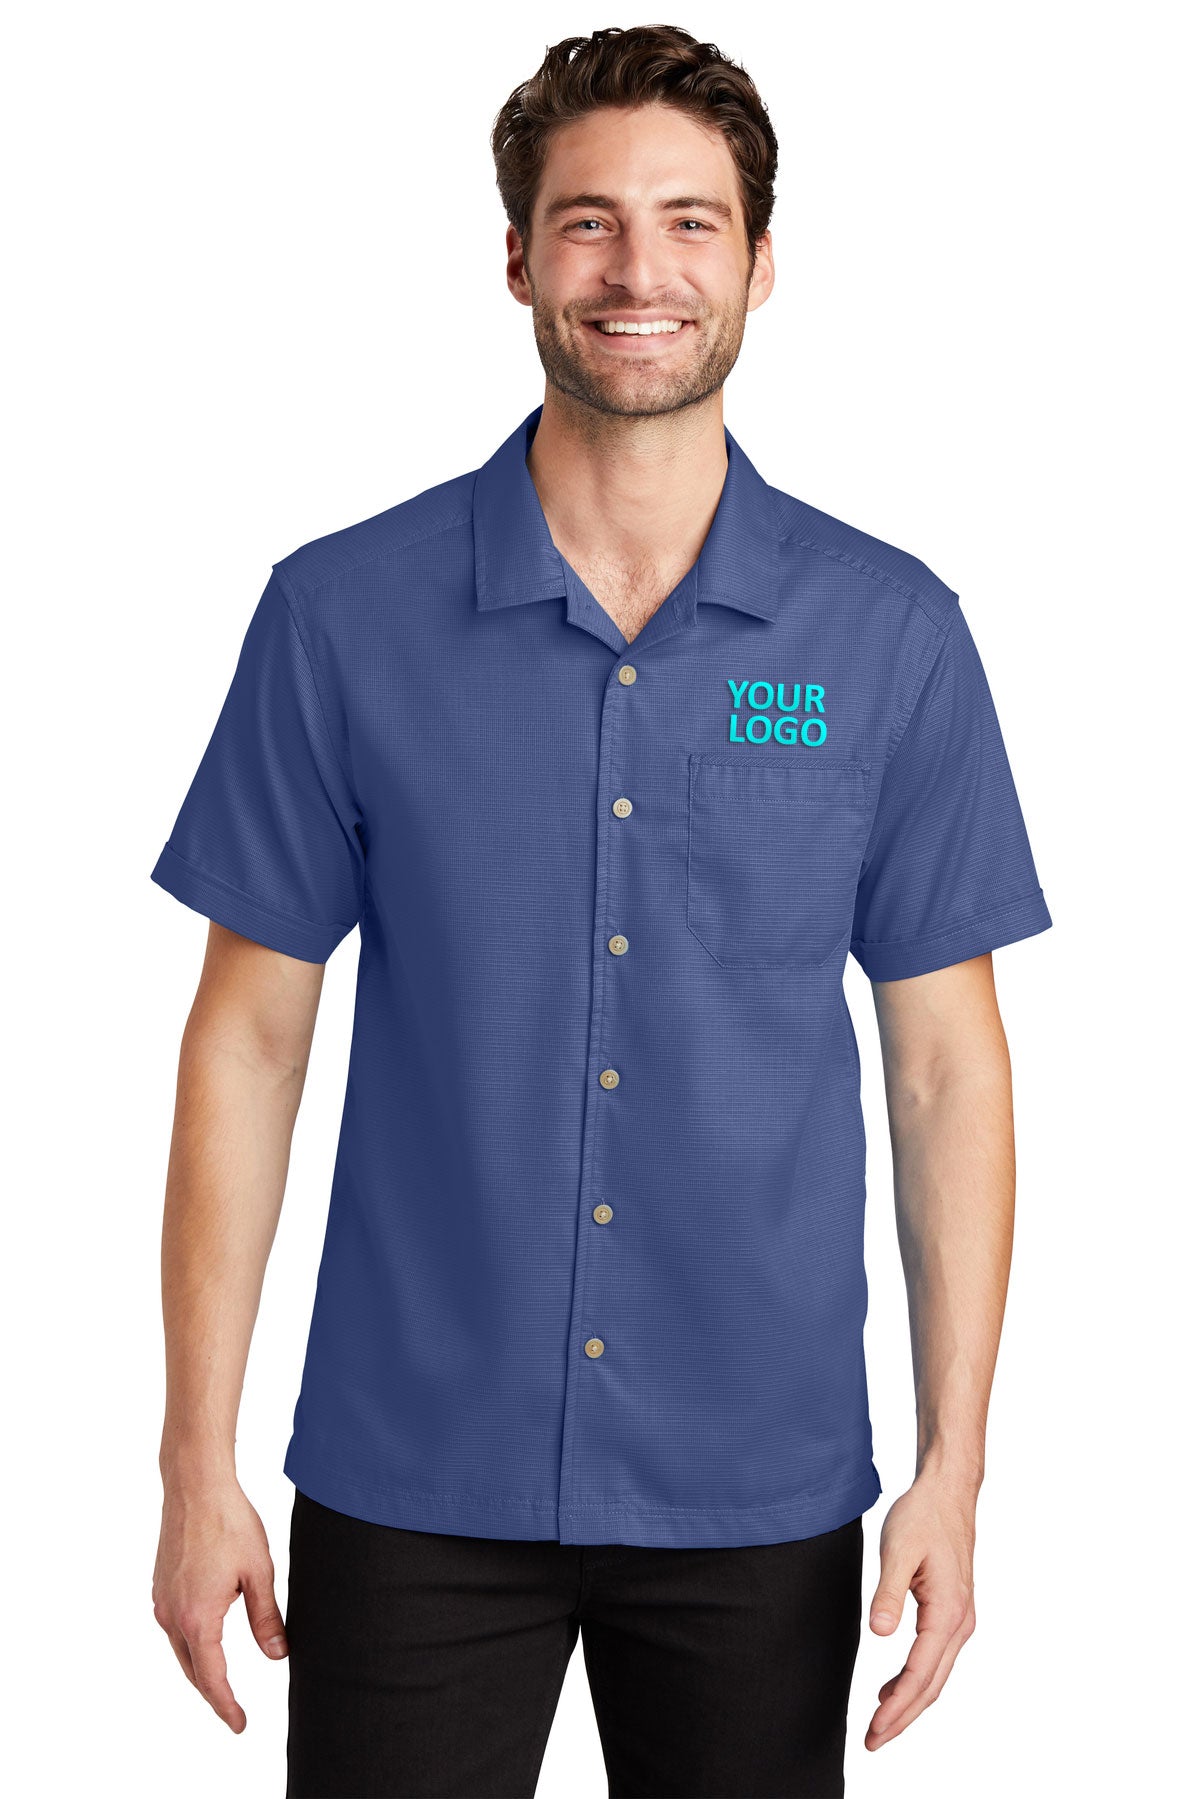 Port Authority Royal S662 custom embroidered shirts